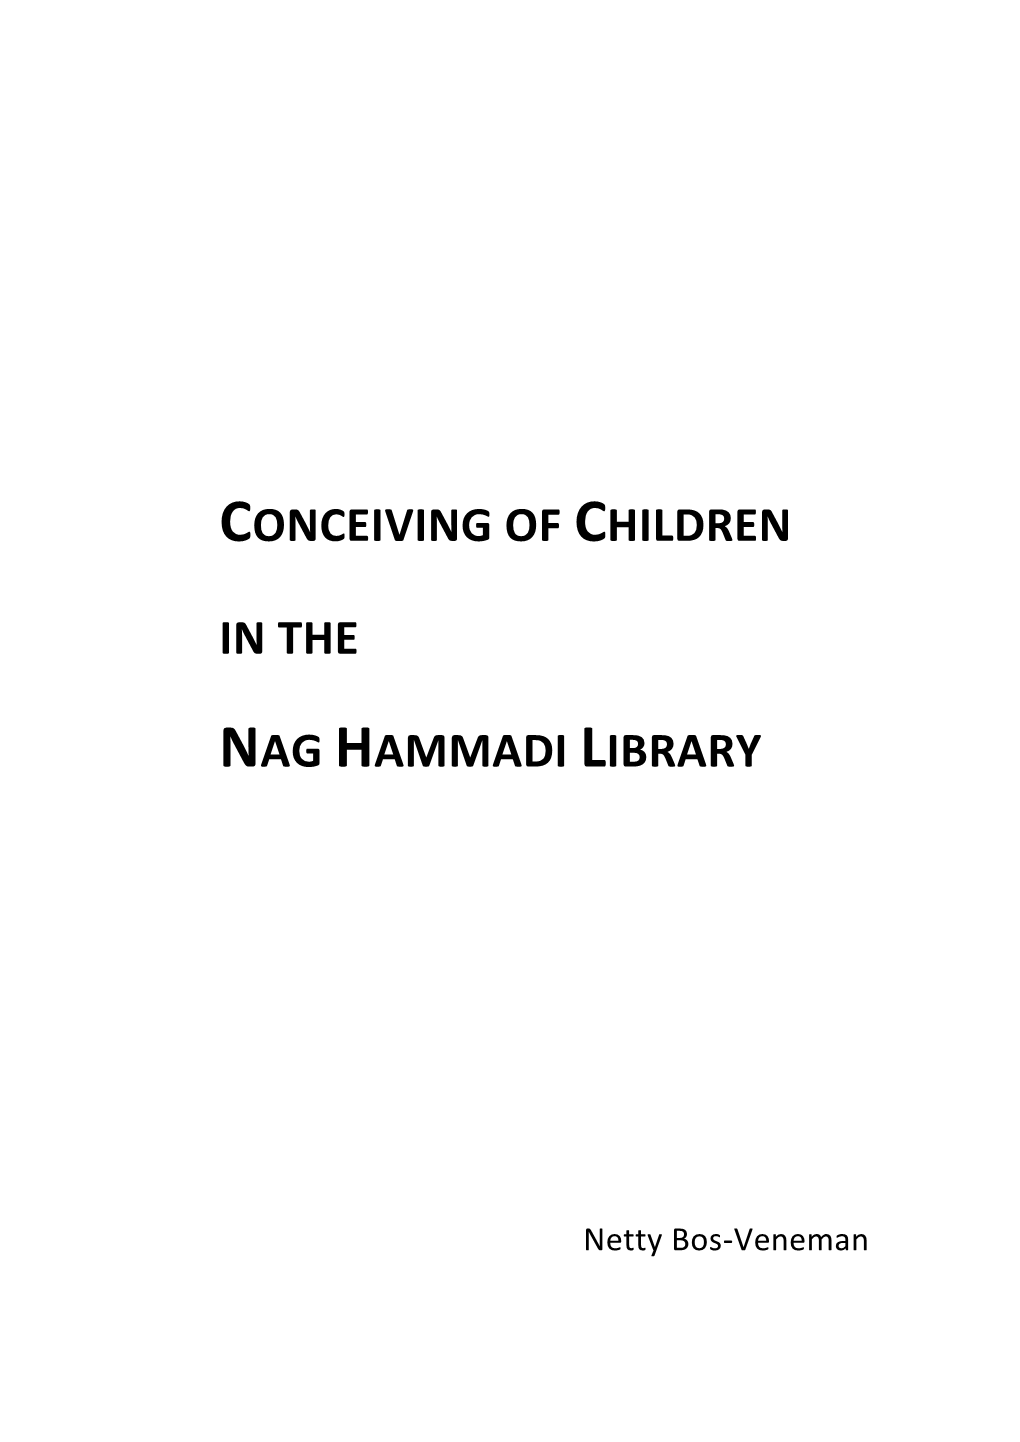 Conceiving of Children in the Nag Hammadi Library